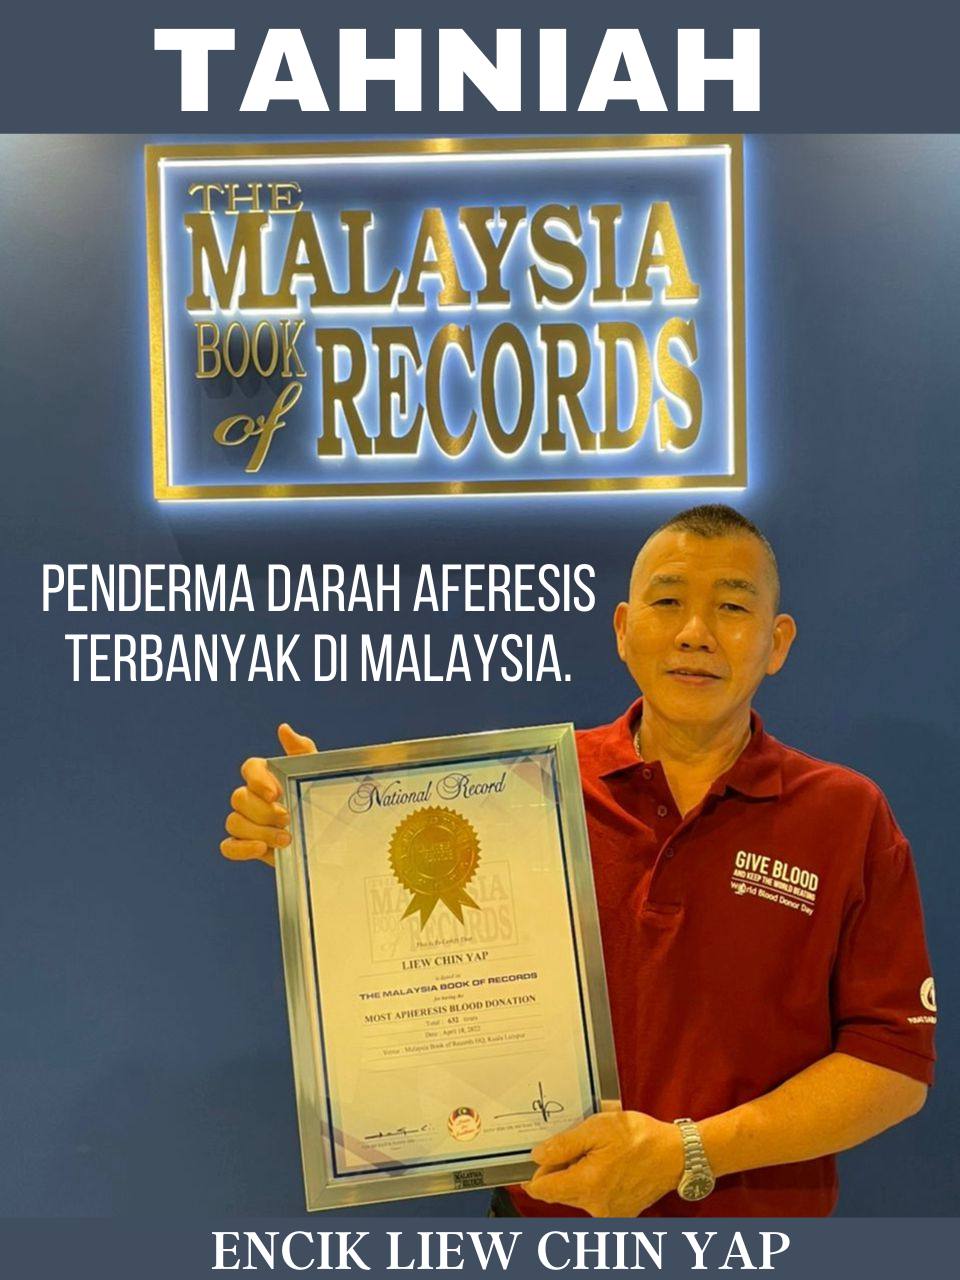 61-year-old Mr Liew Chin Yap has been recognised by the Malaysian Book of Records as being the Malaysian who has undergone the most amount of apheresis blood donations. Image credit: National Blood Bank